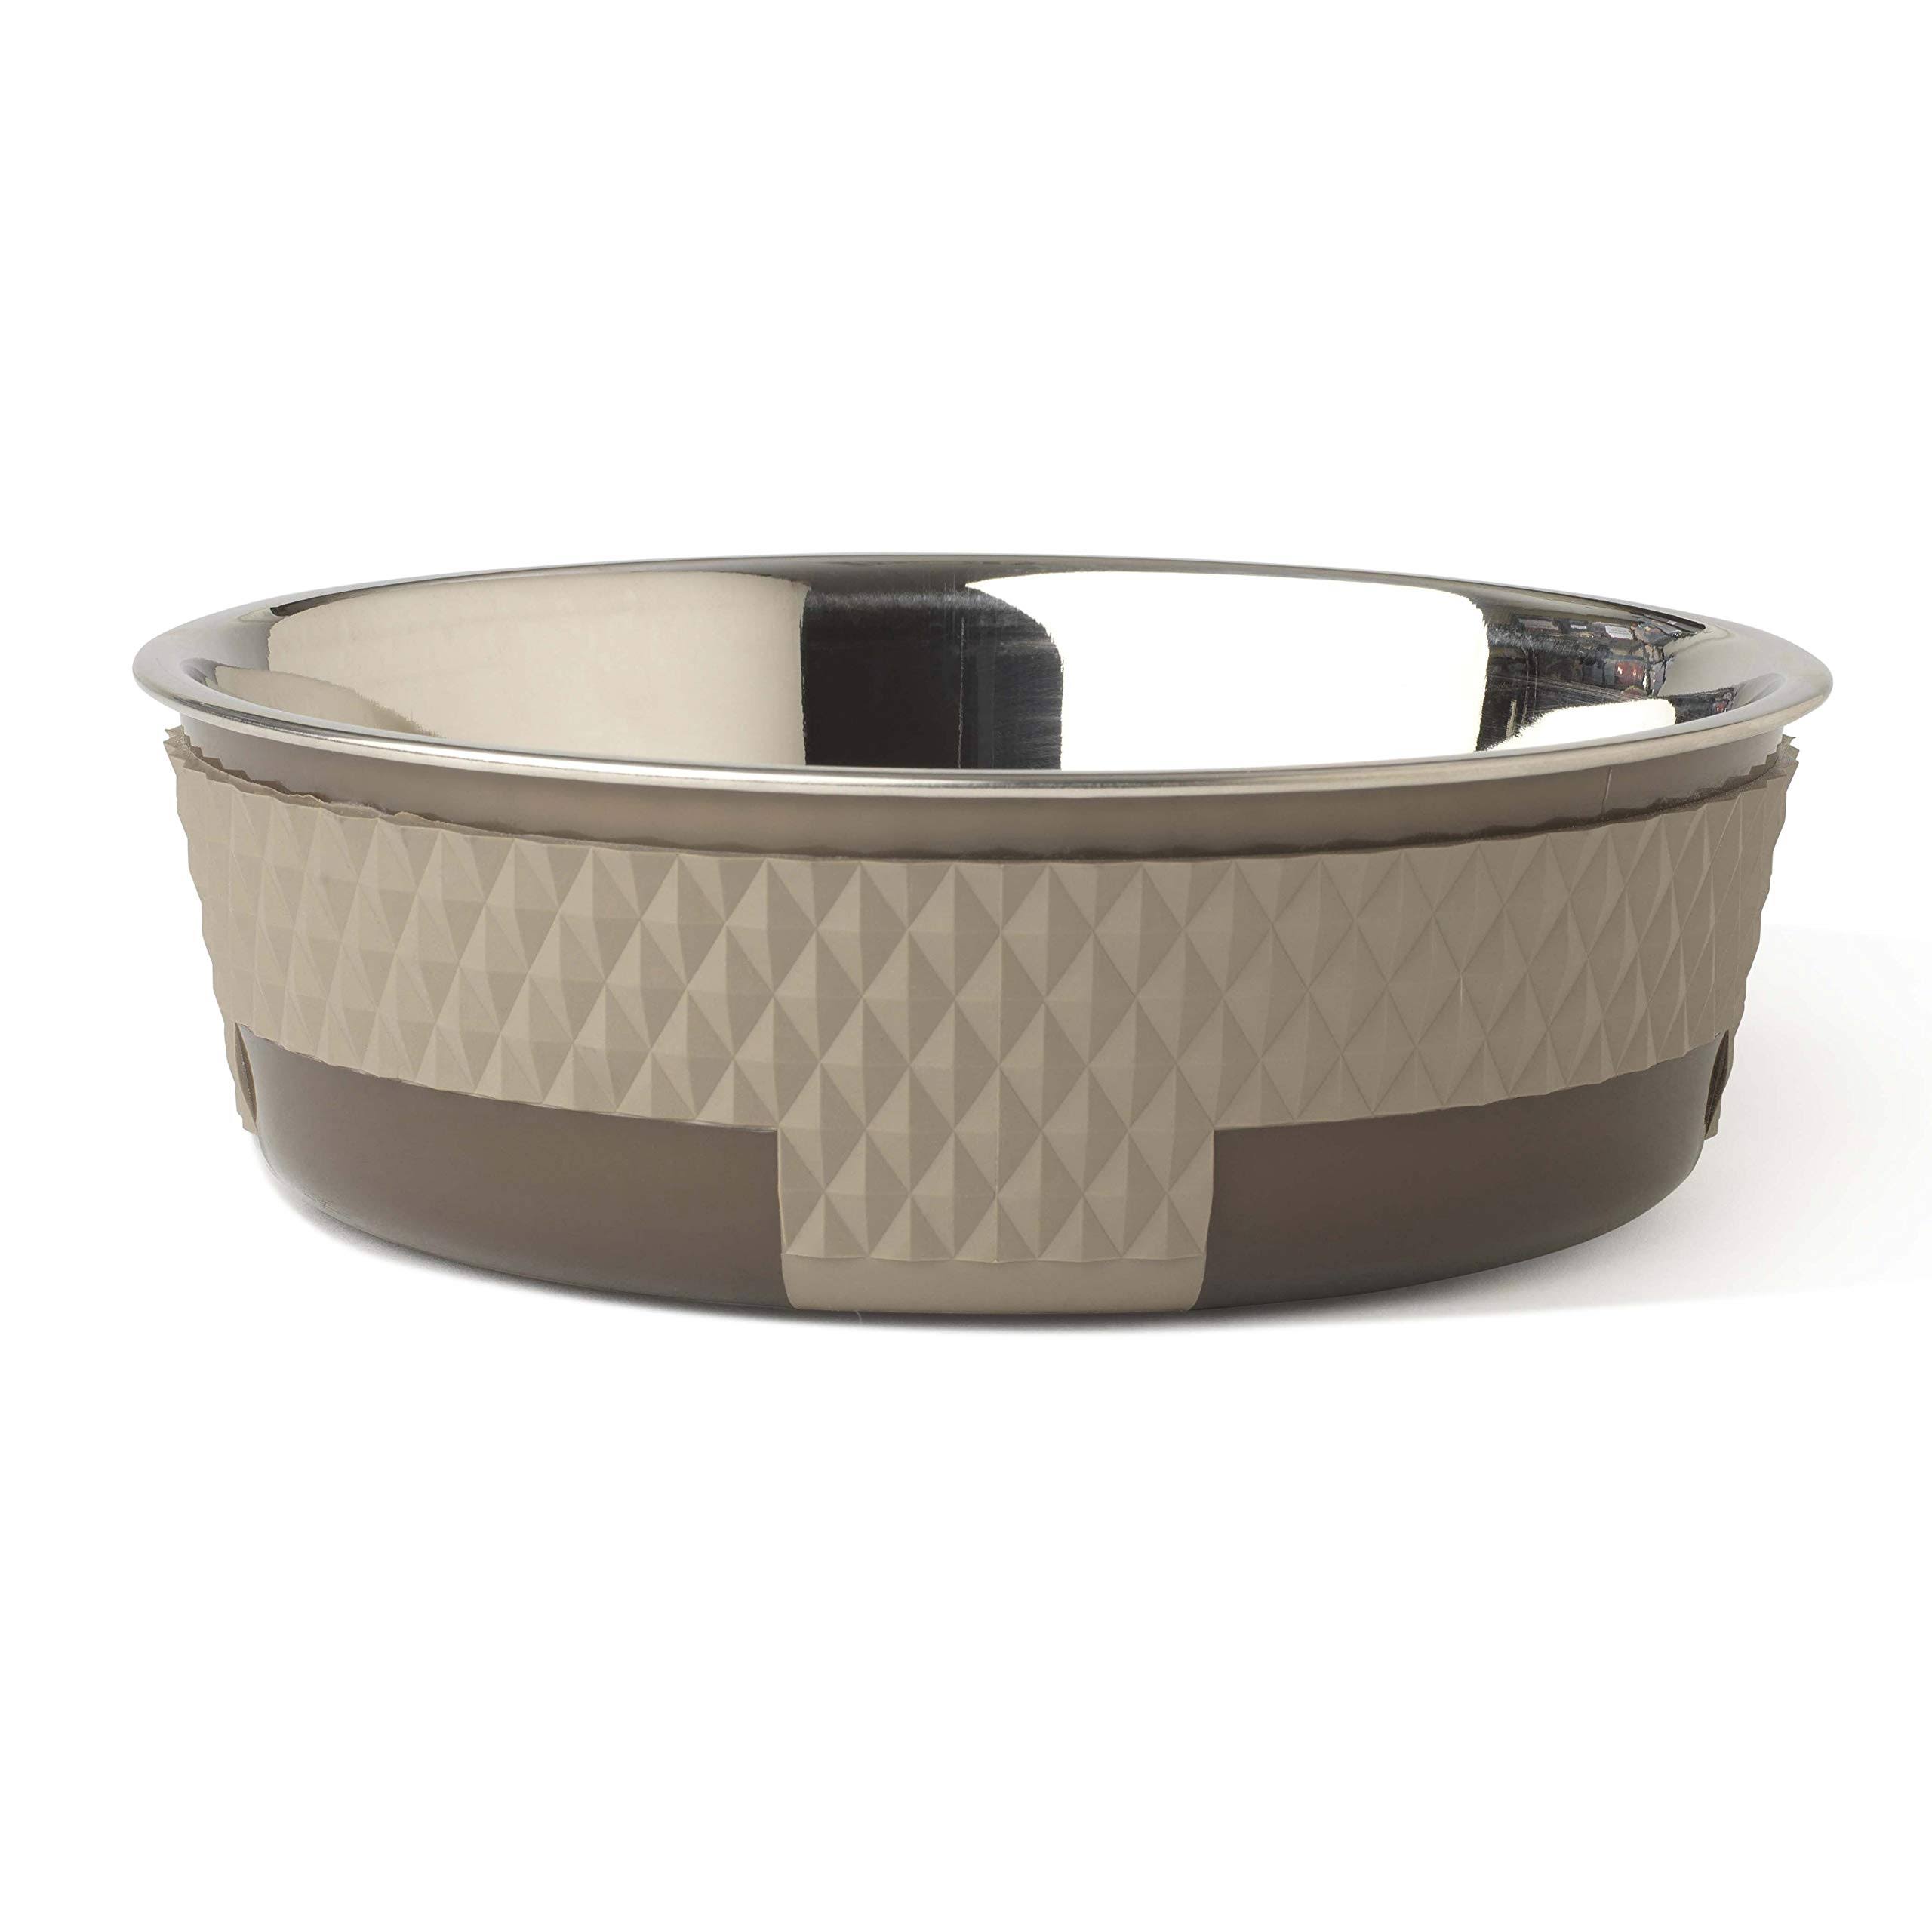 Petrageous Designs Kona Non-Skid Stainless Steel Dog Bowl, Taupe, 6.5-Cup